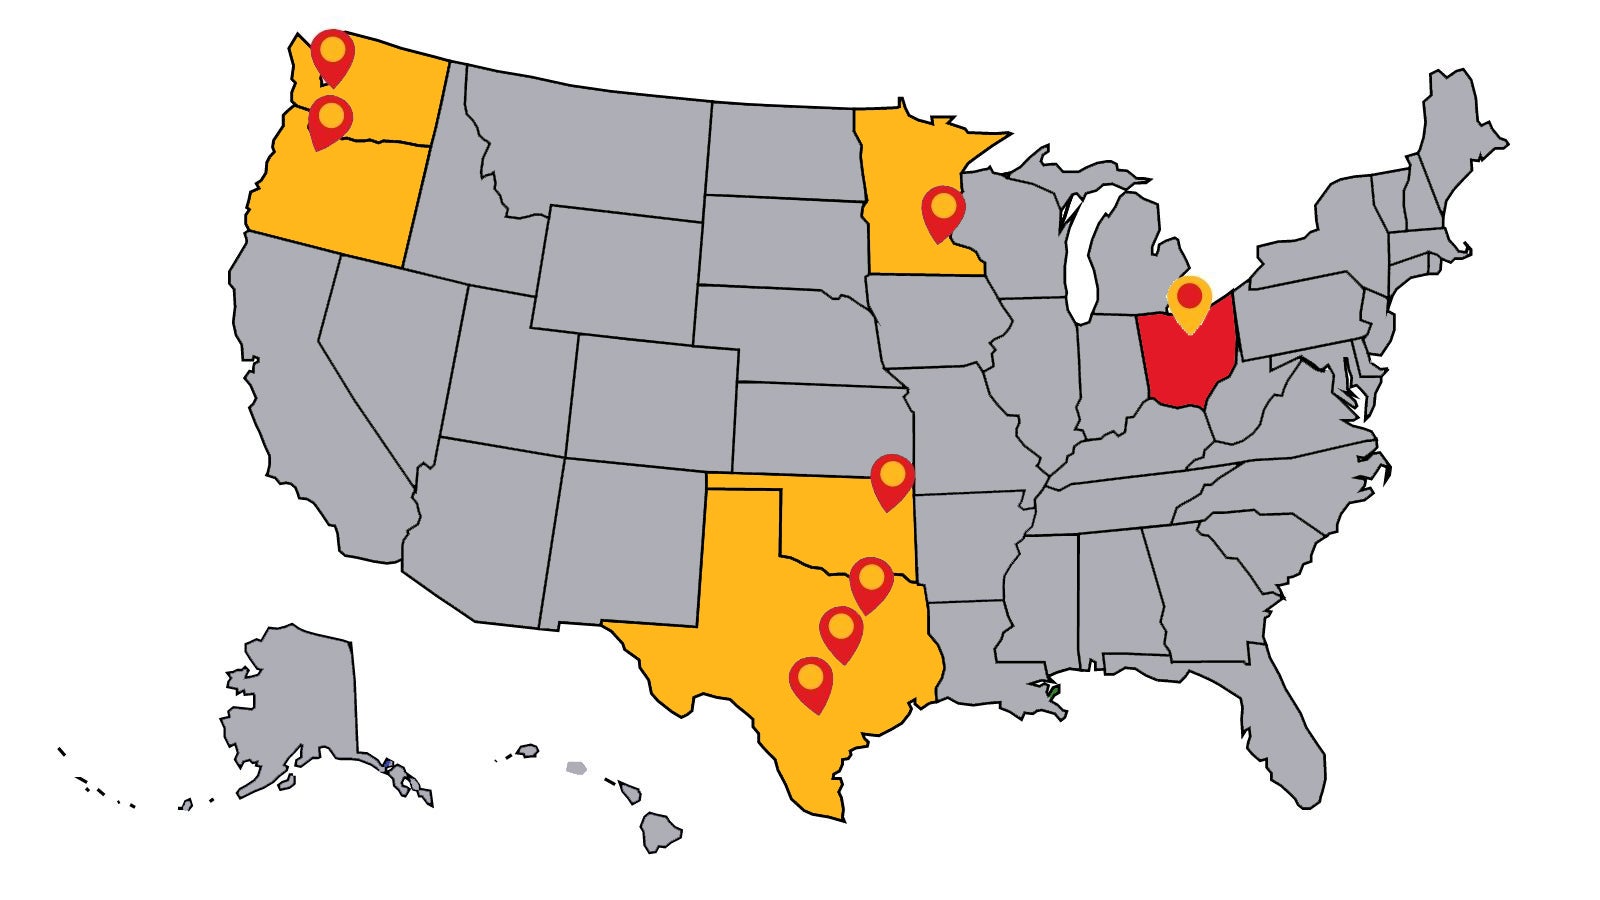 A map of the United States with pins in Washington, Oregon, Oklahoma, Texas, and Minnesota (colored yellow) and Ohio (colored red).